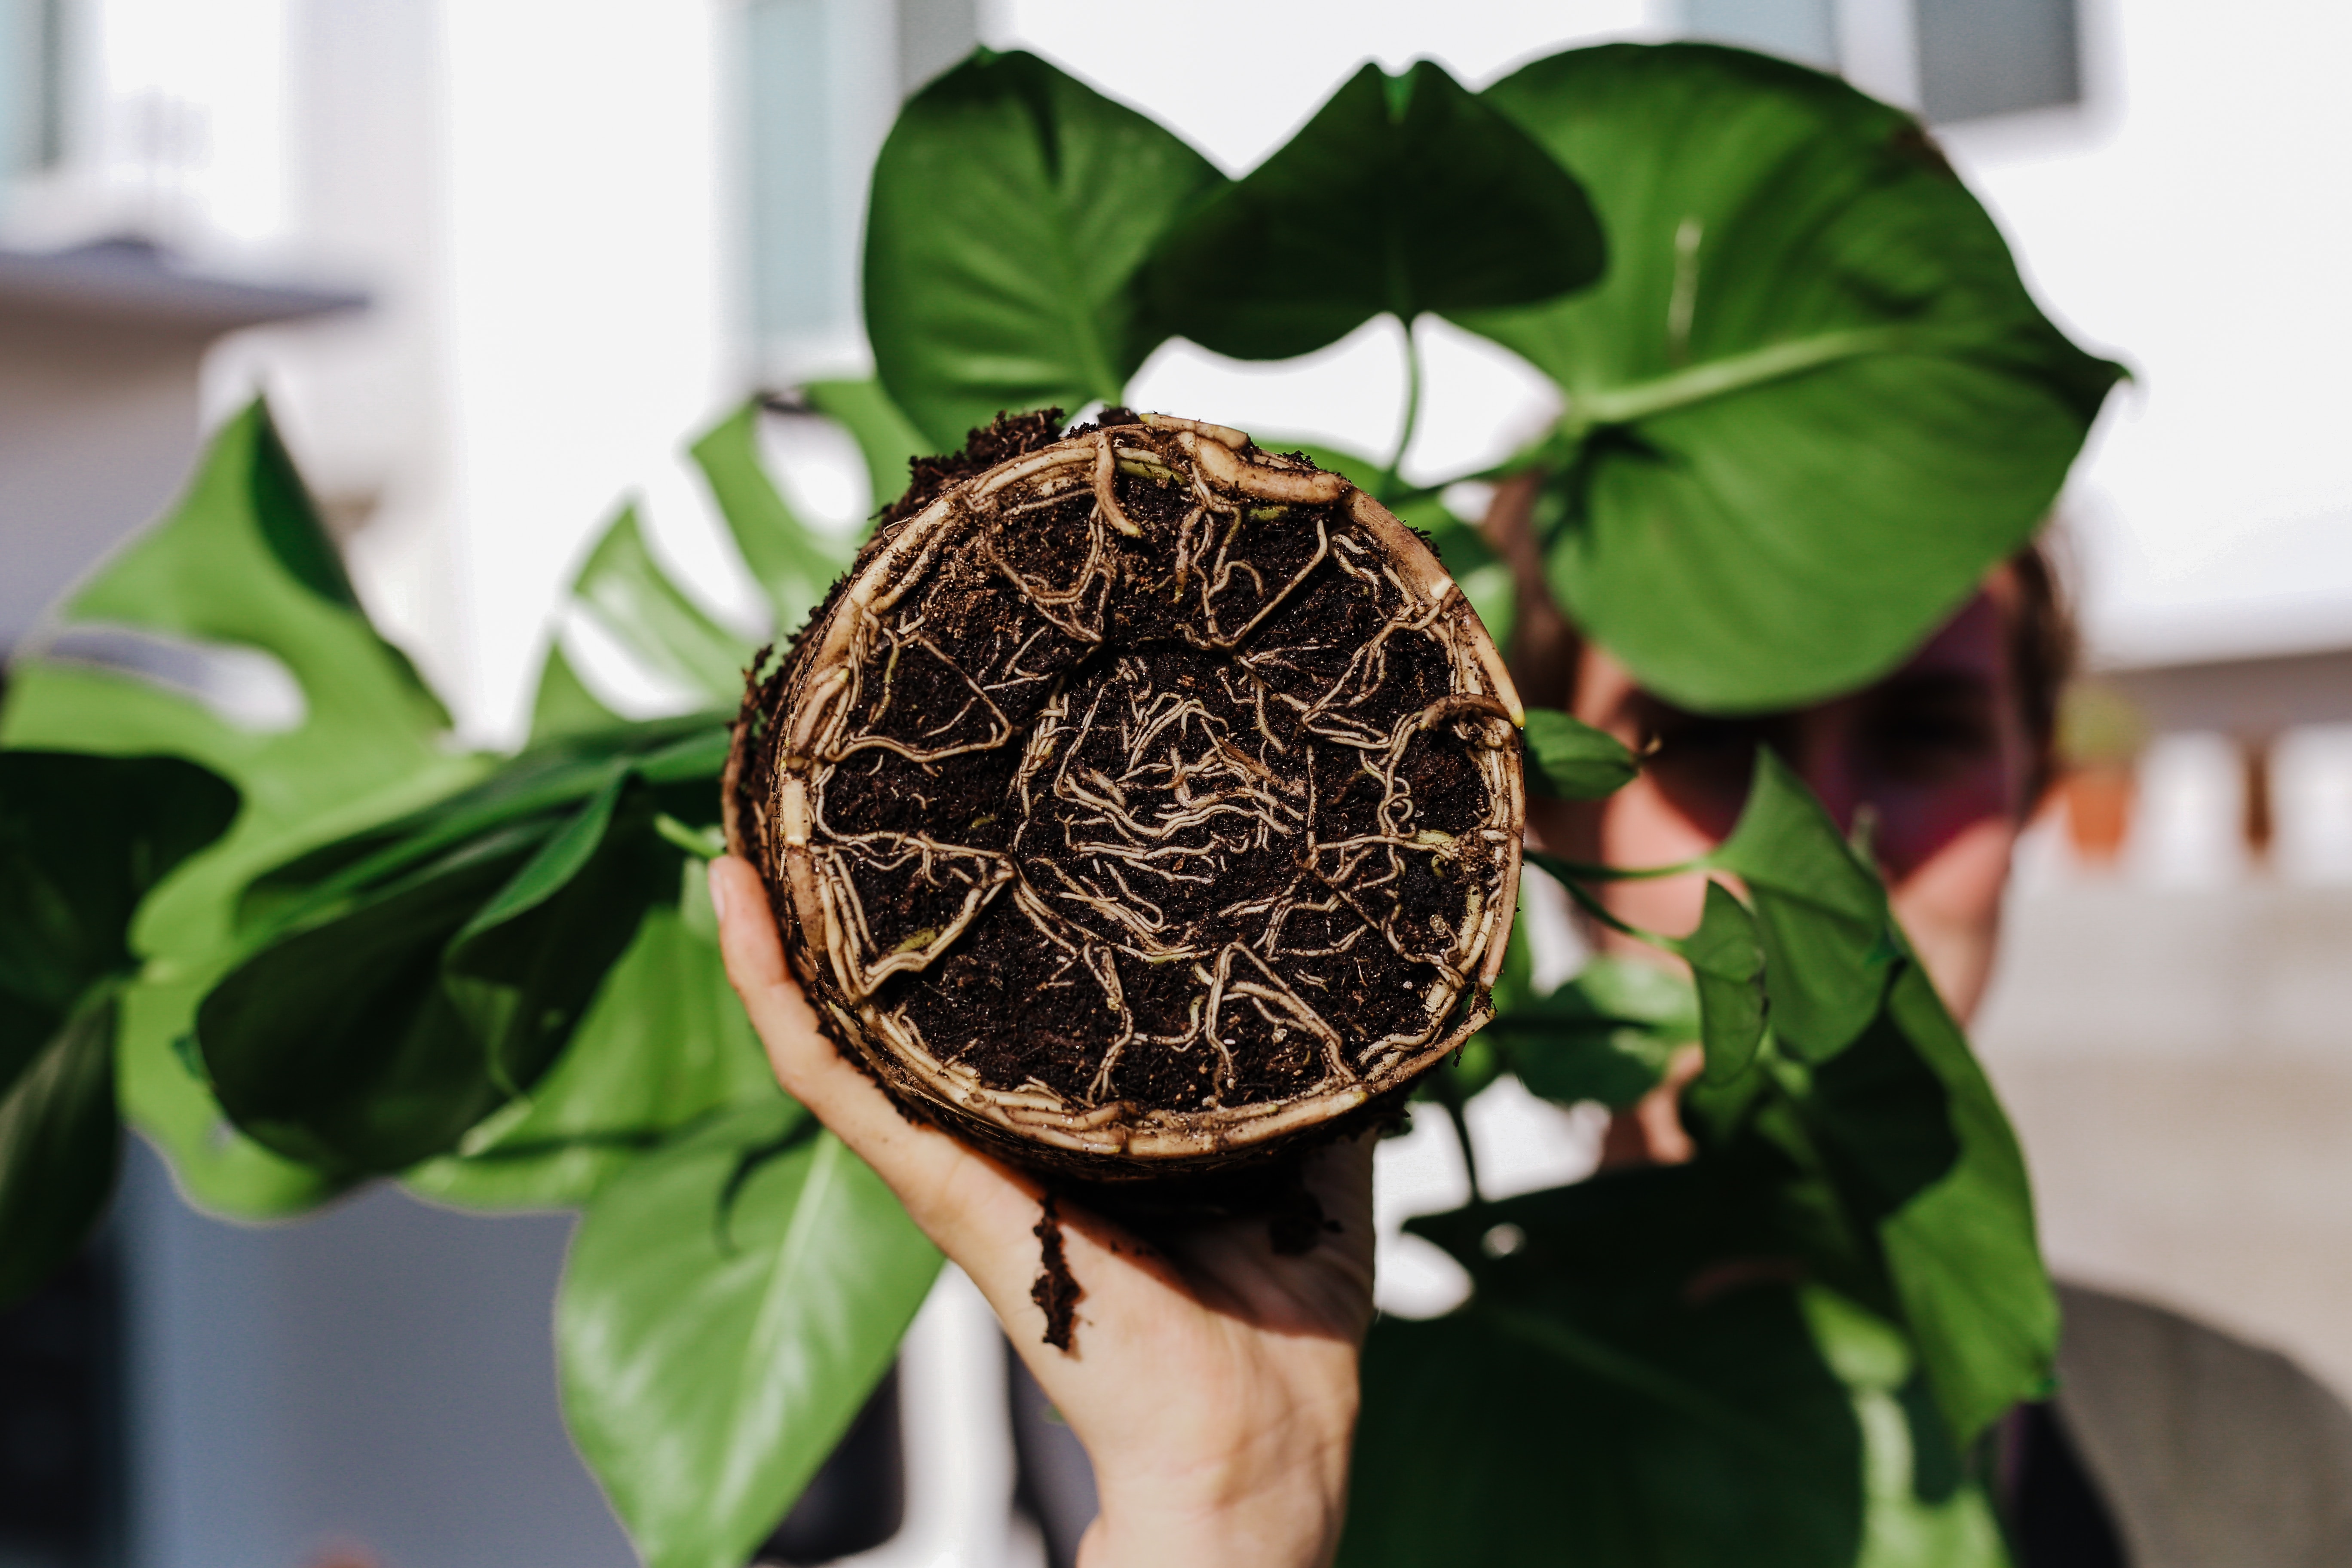 There are intricate chemical processes happening inside plant roots. Image: Josue Michel /Unsplash